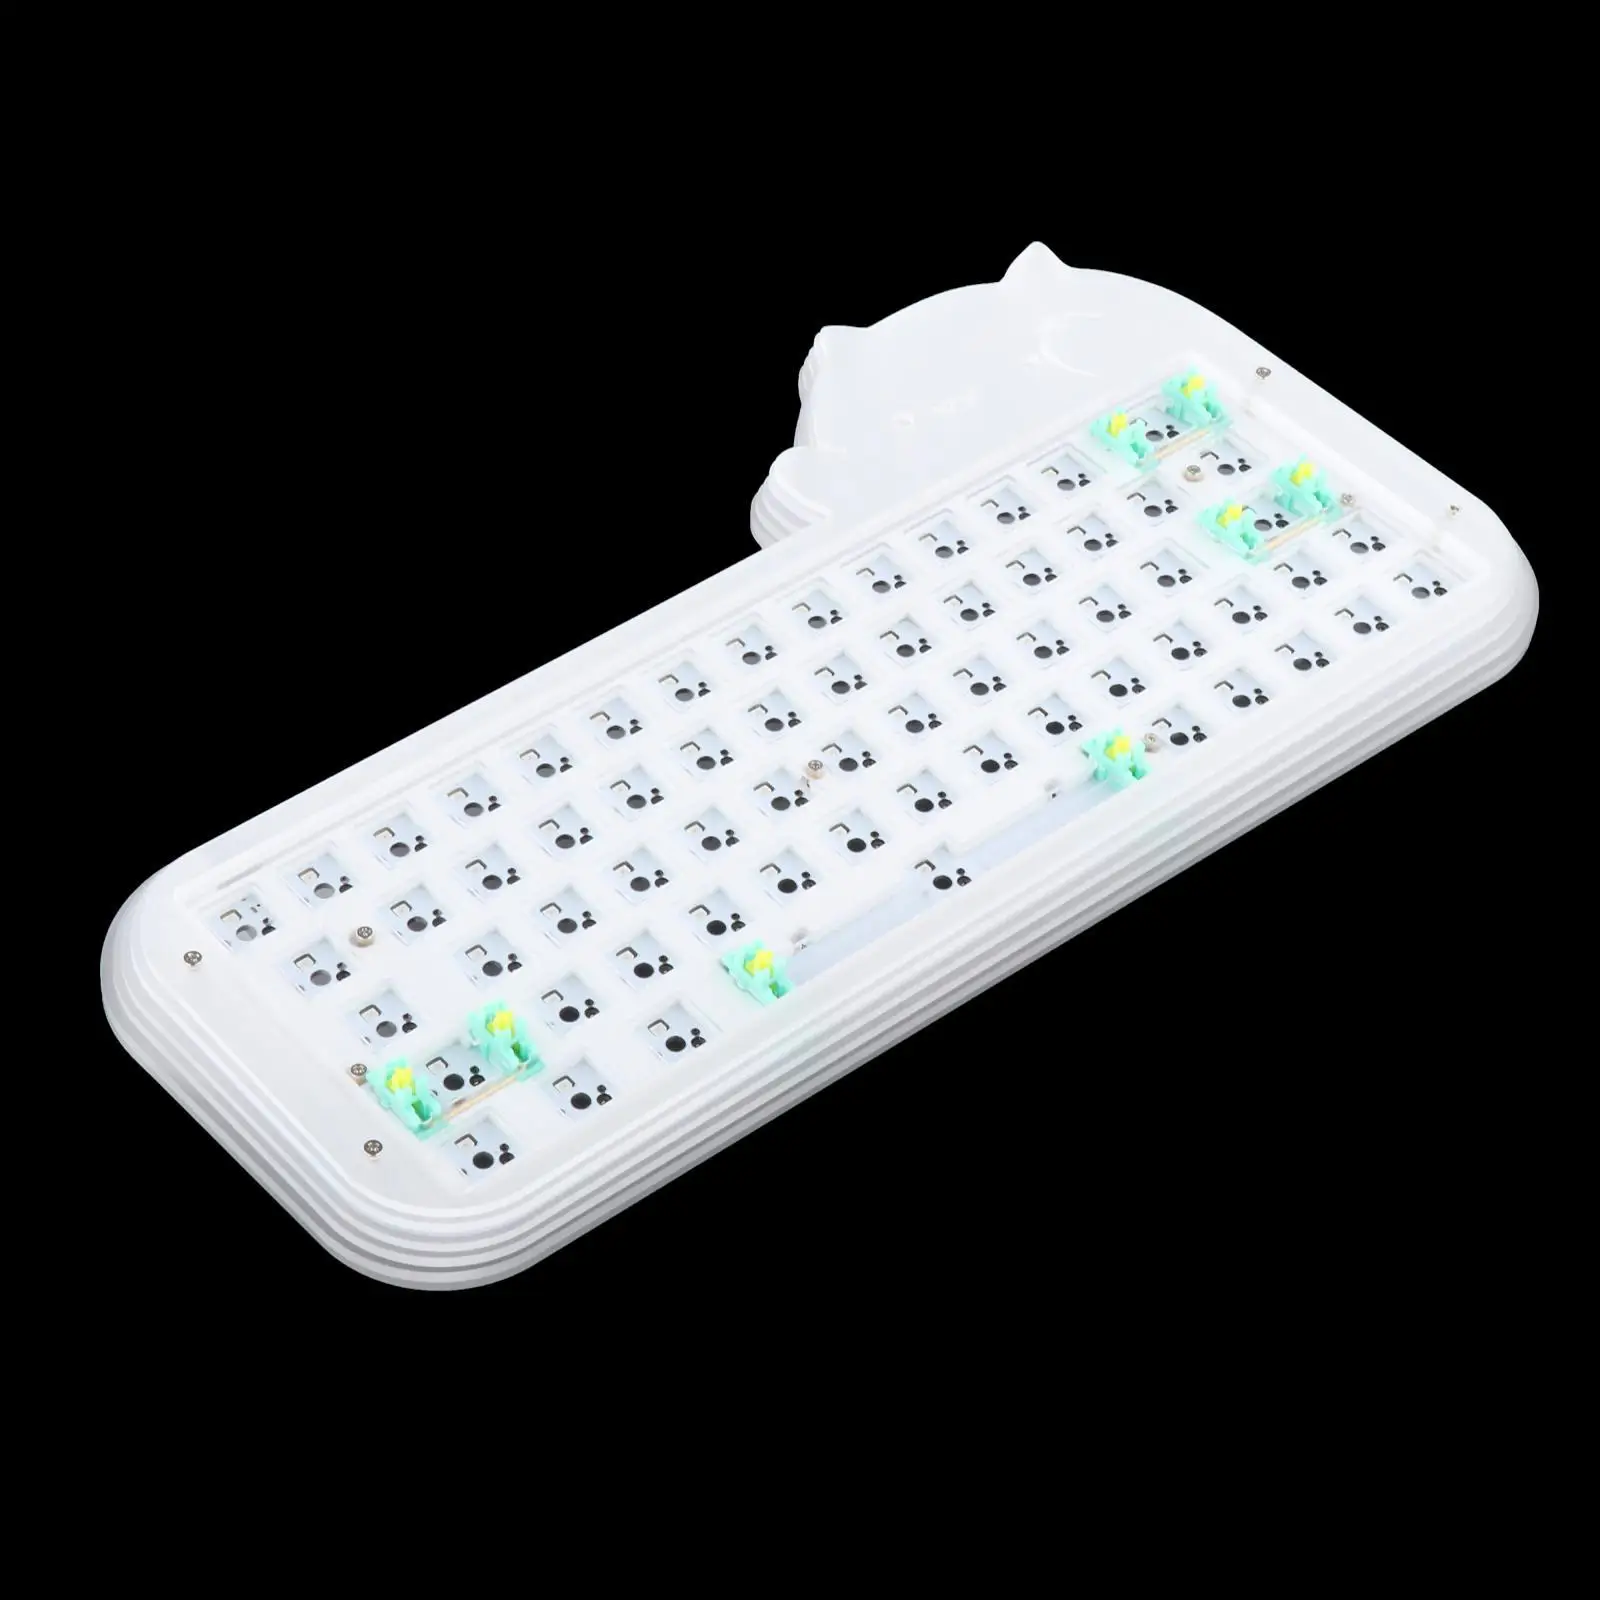 Mechanical Keyboard DIY Kit Hot Swap Switches RGB LED Backlighting 65% Modular 64 Keys Wired Mounting Plate for Computer Windows